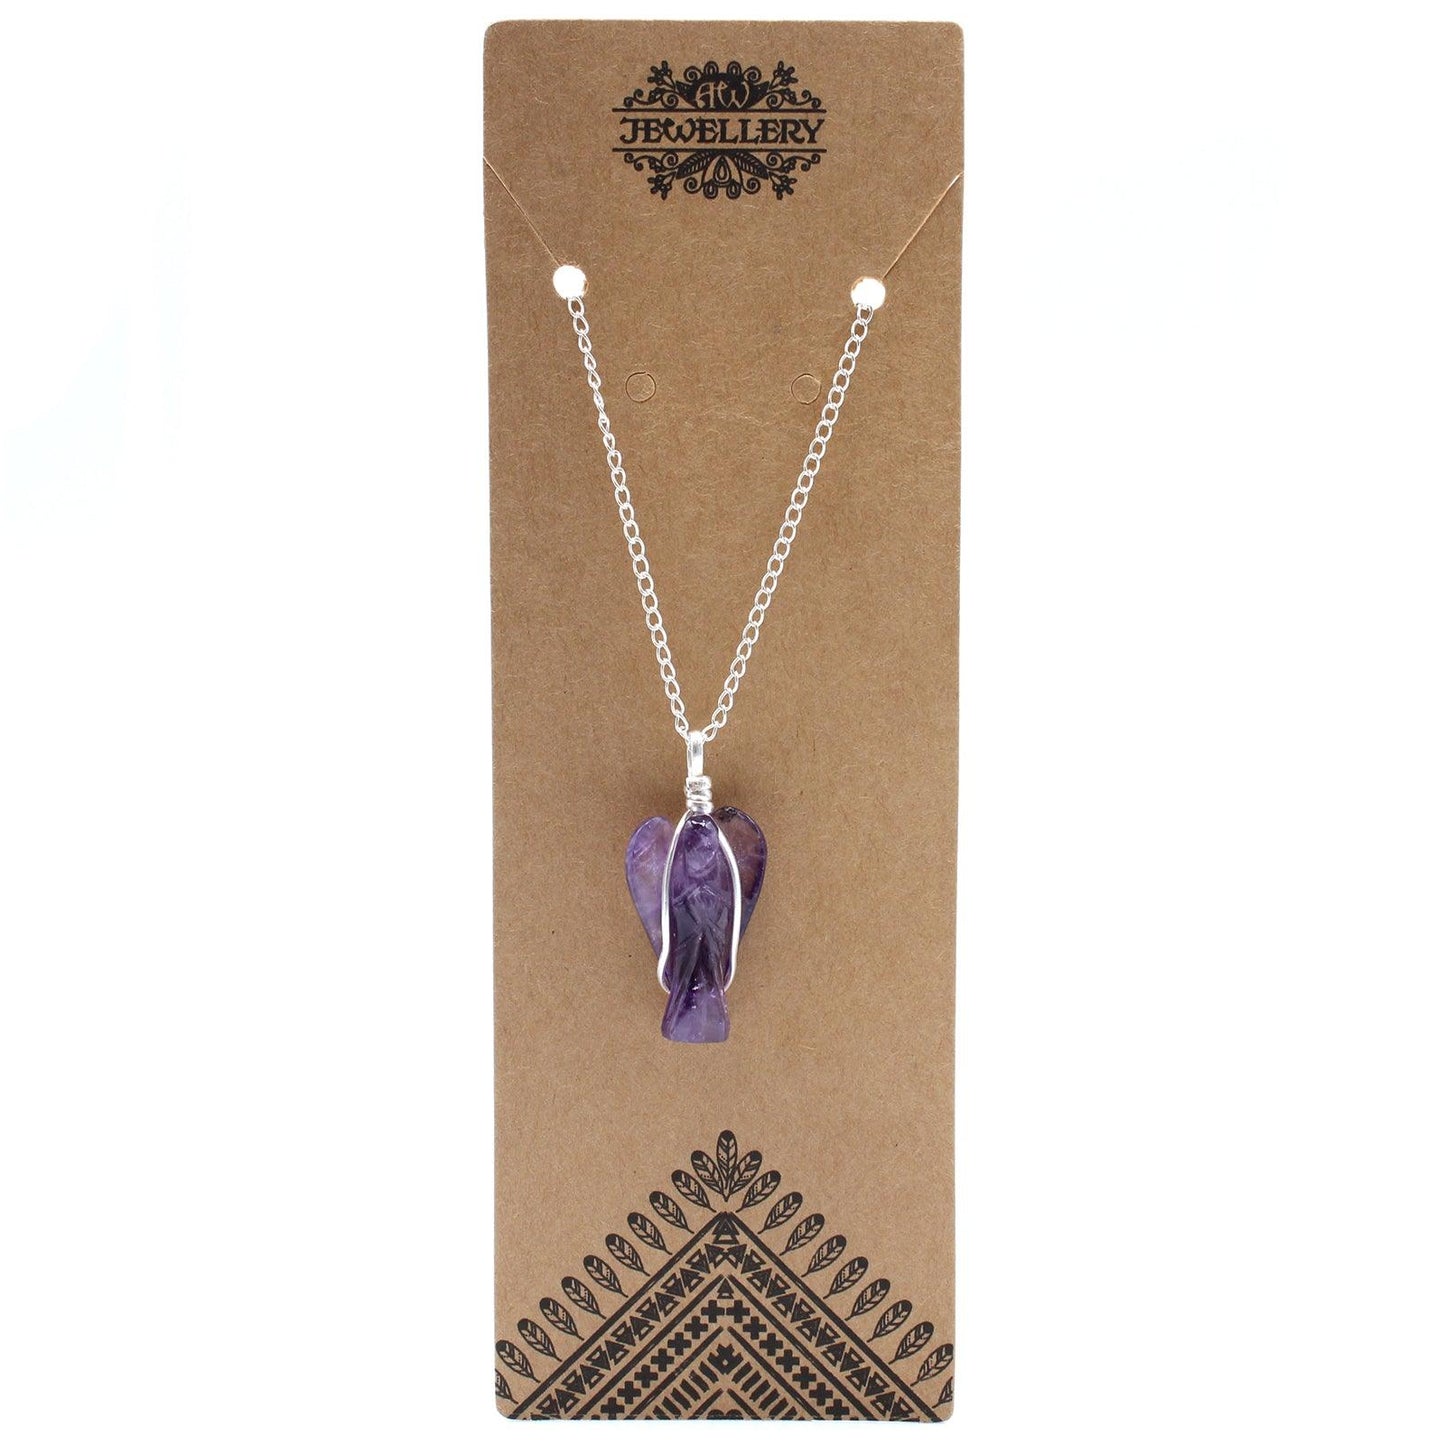 Gemstone Guardian Angel Pendant Necklace - Amethyst - Free Pouch - Home Inspired Gifts